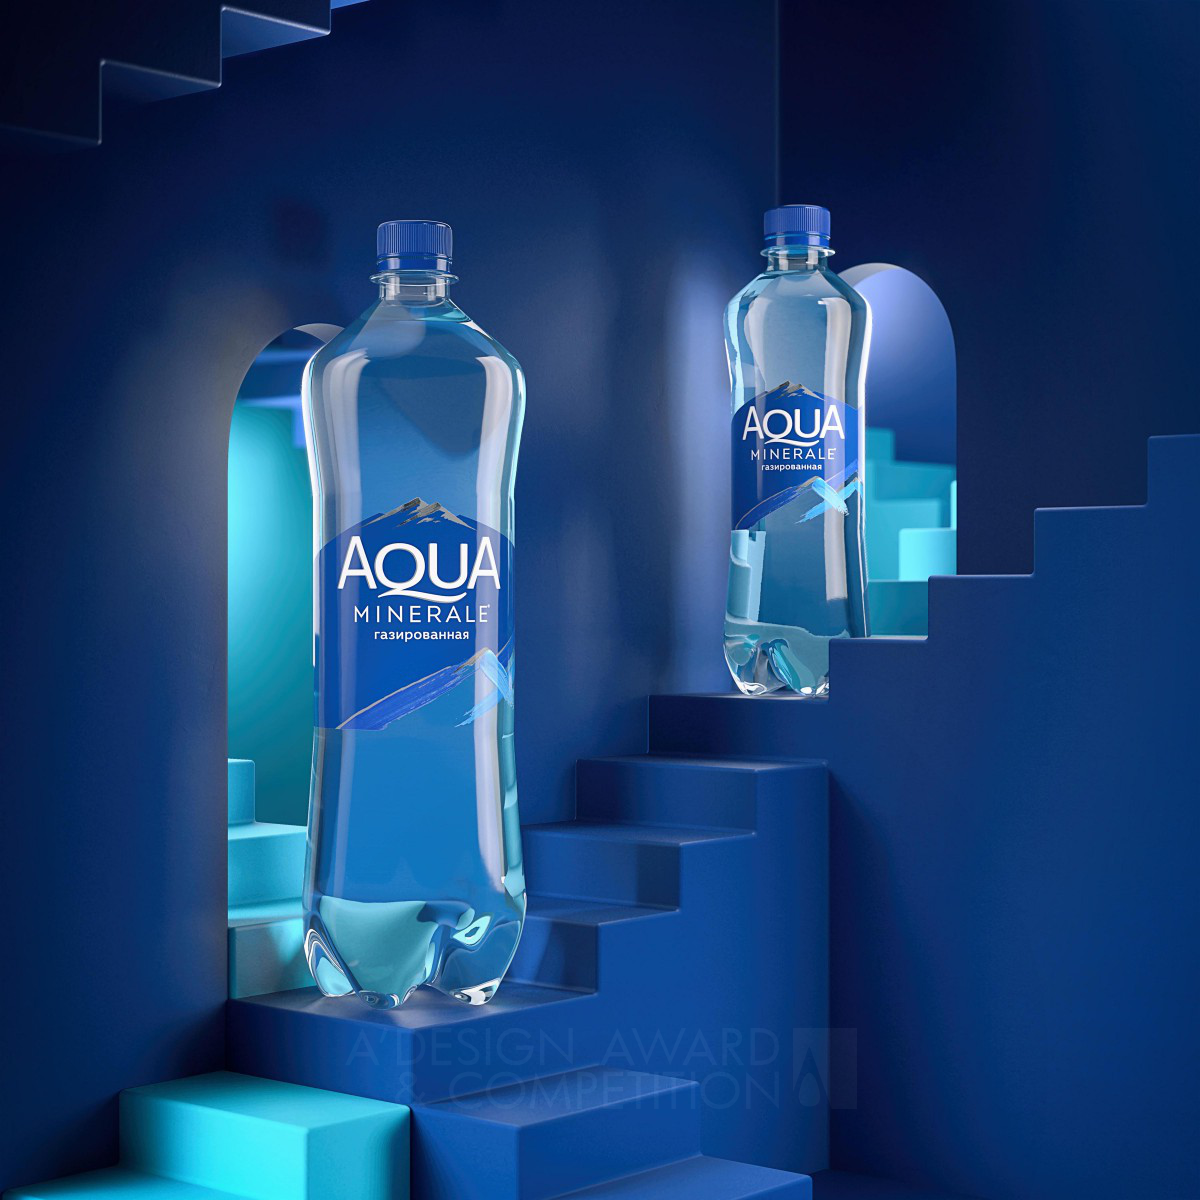 Aqua Minerale Redesign Beverage Packaging by PepsiCo Design and Innovation Silver Packaging Design Award Winner 2022 